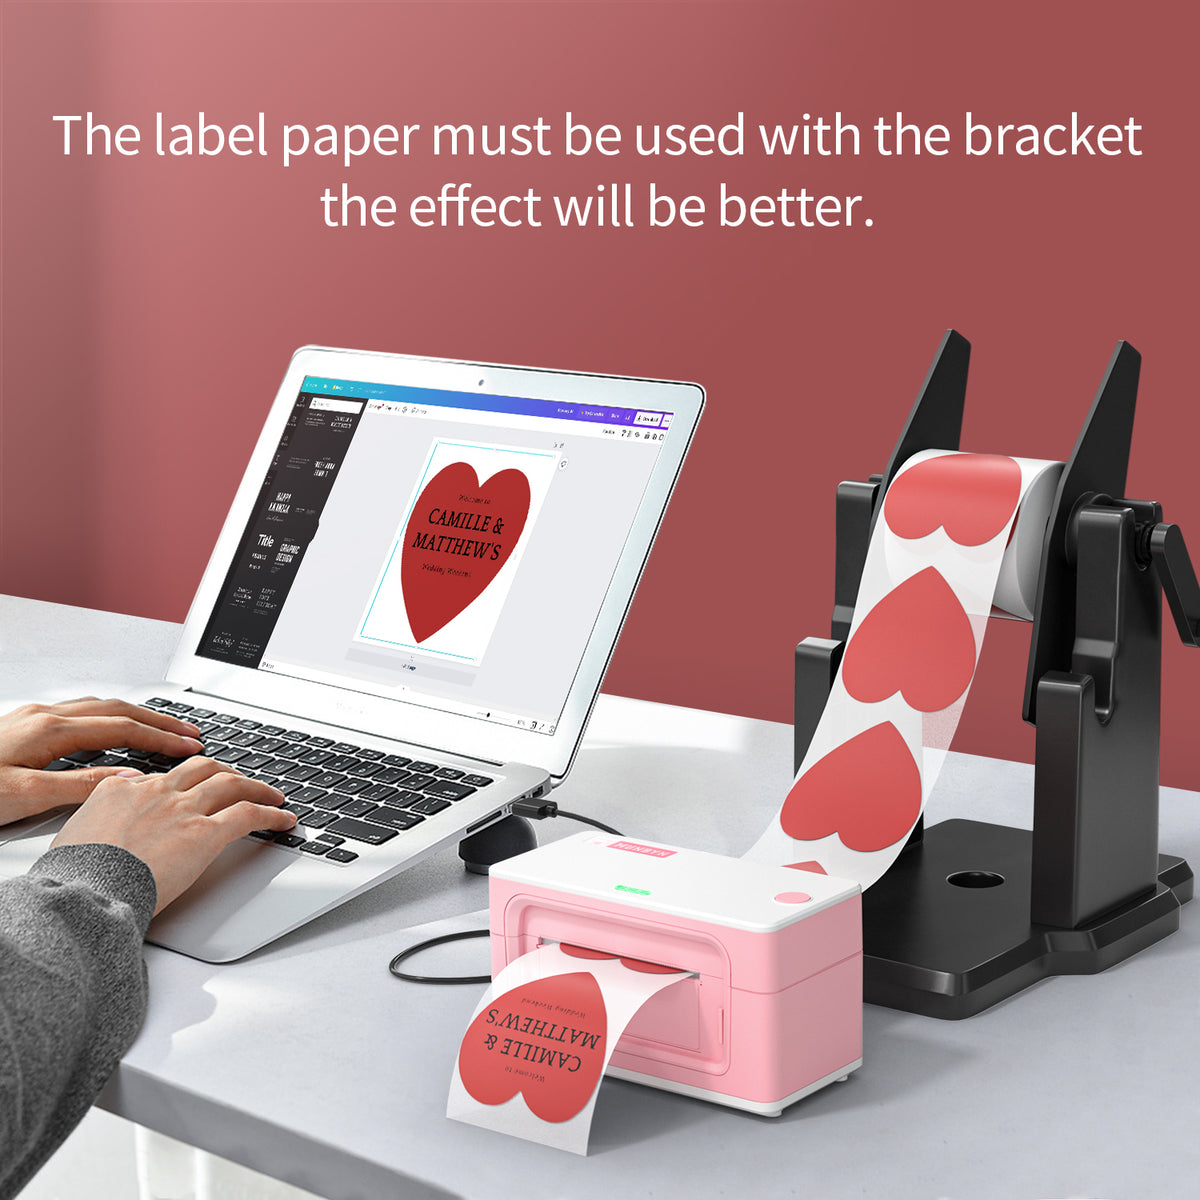 With the use of a label roll holder, heart shaped thermal labels can be printed more easily.